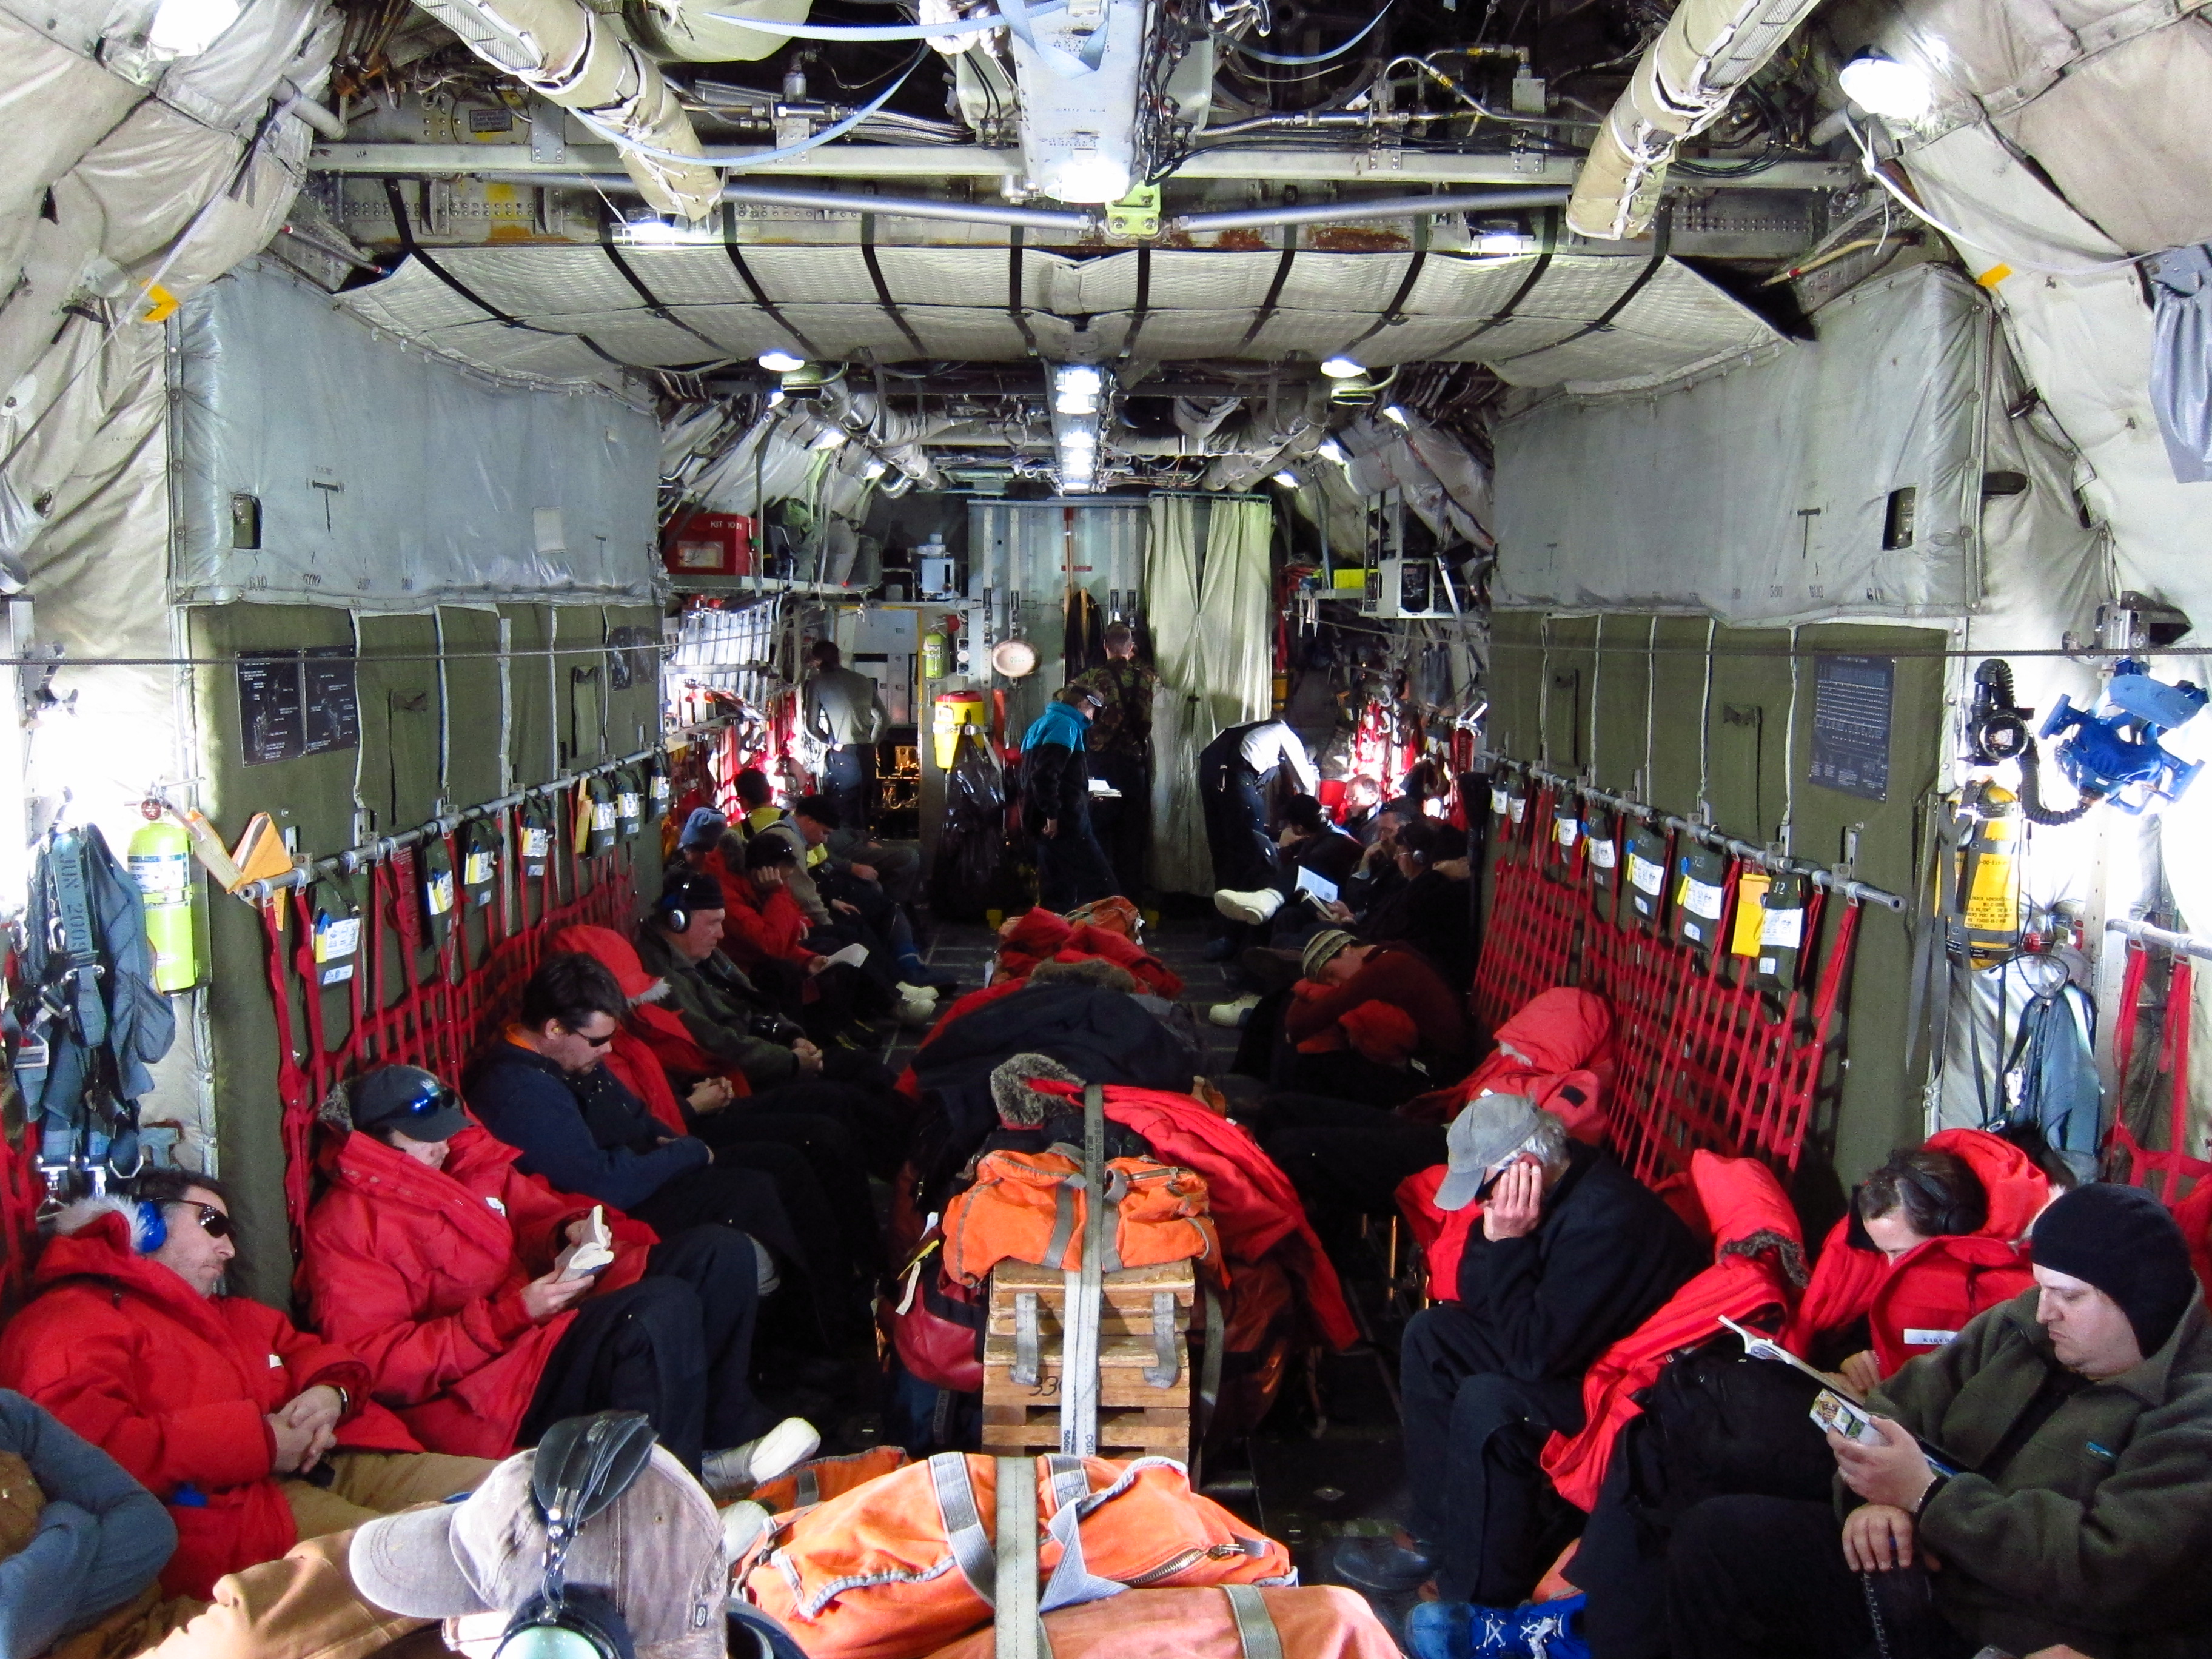 Flight to the South Pole